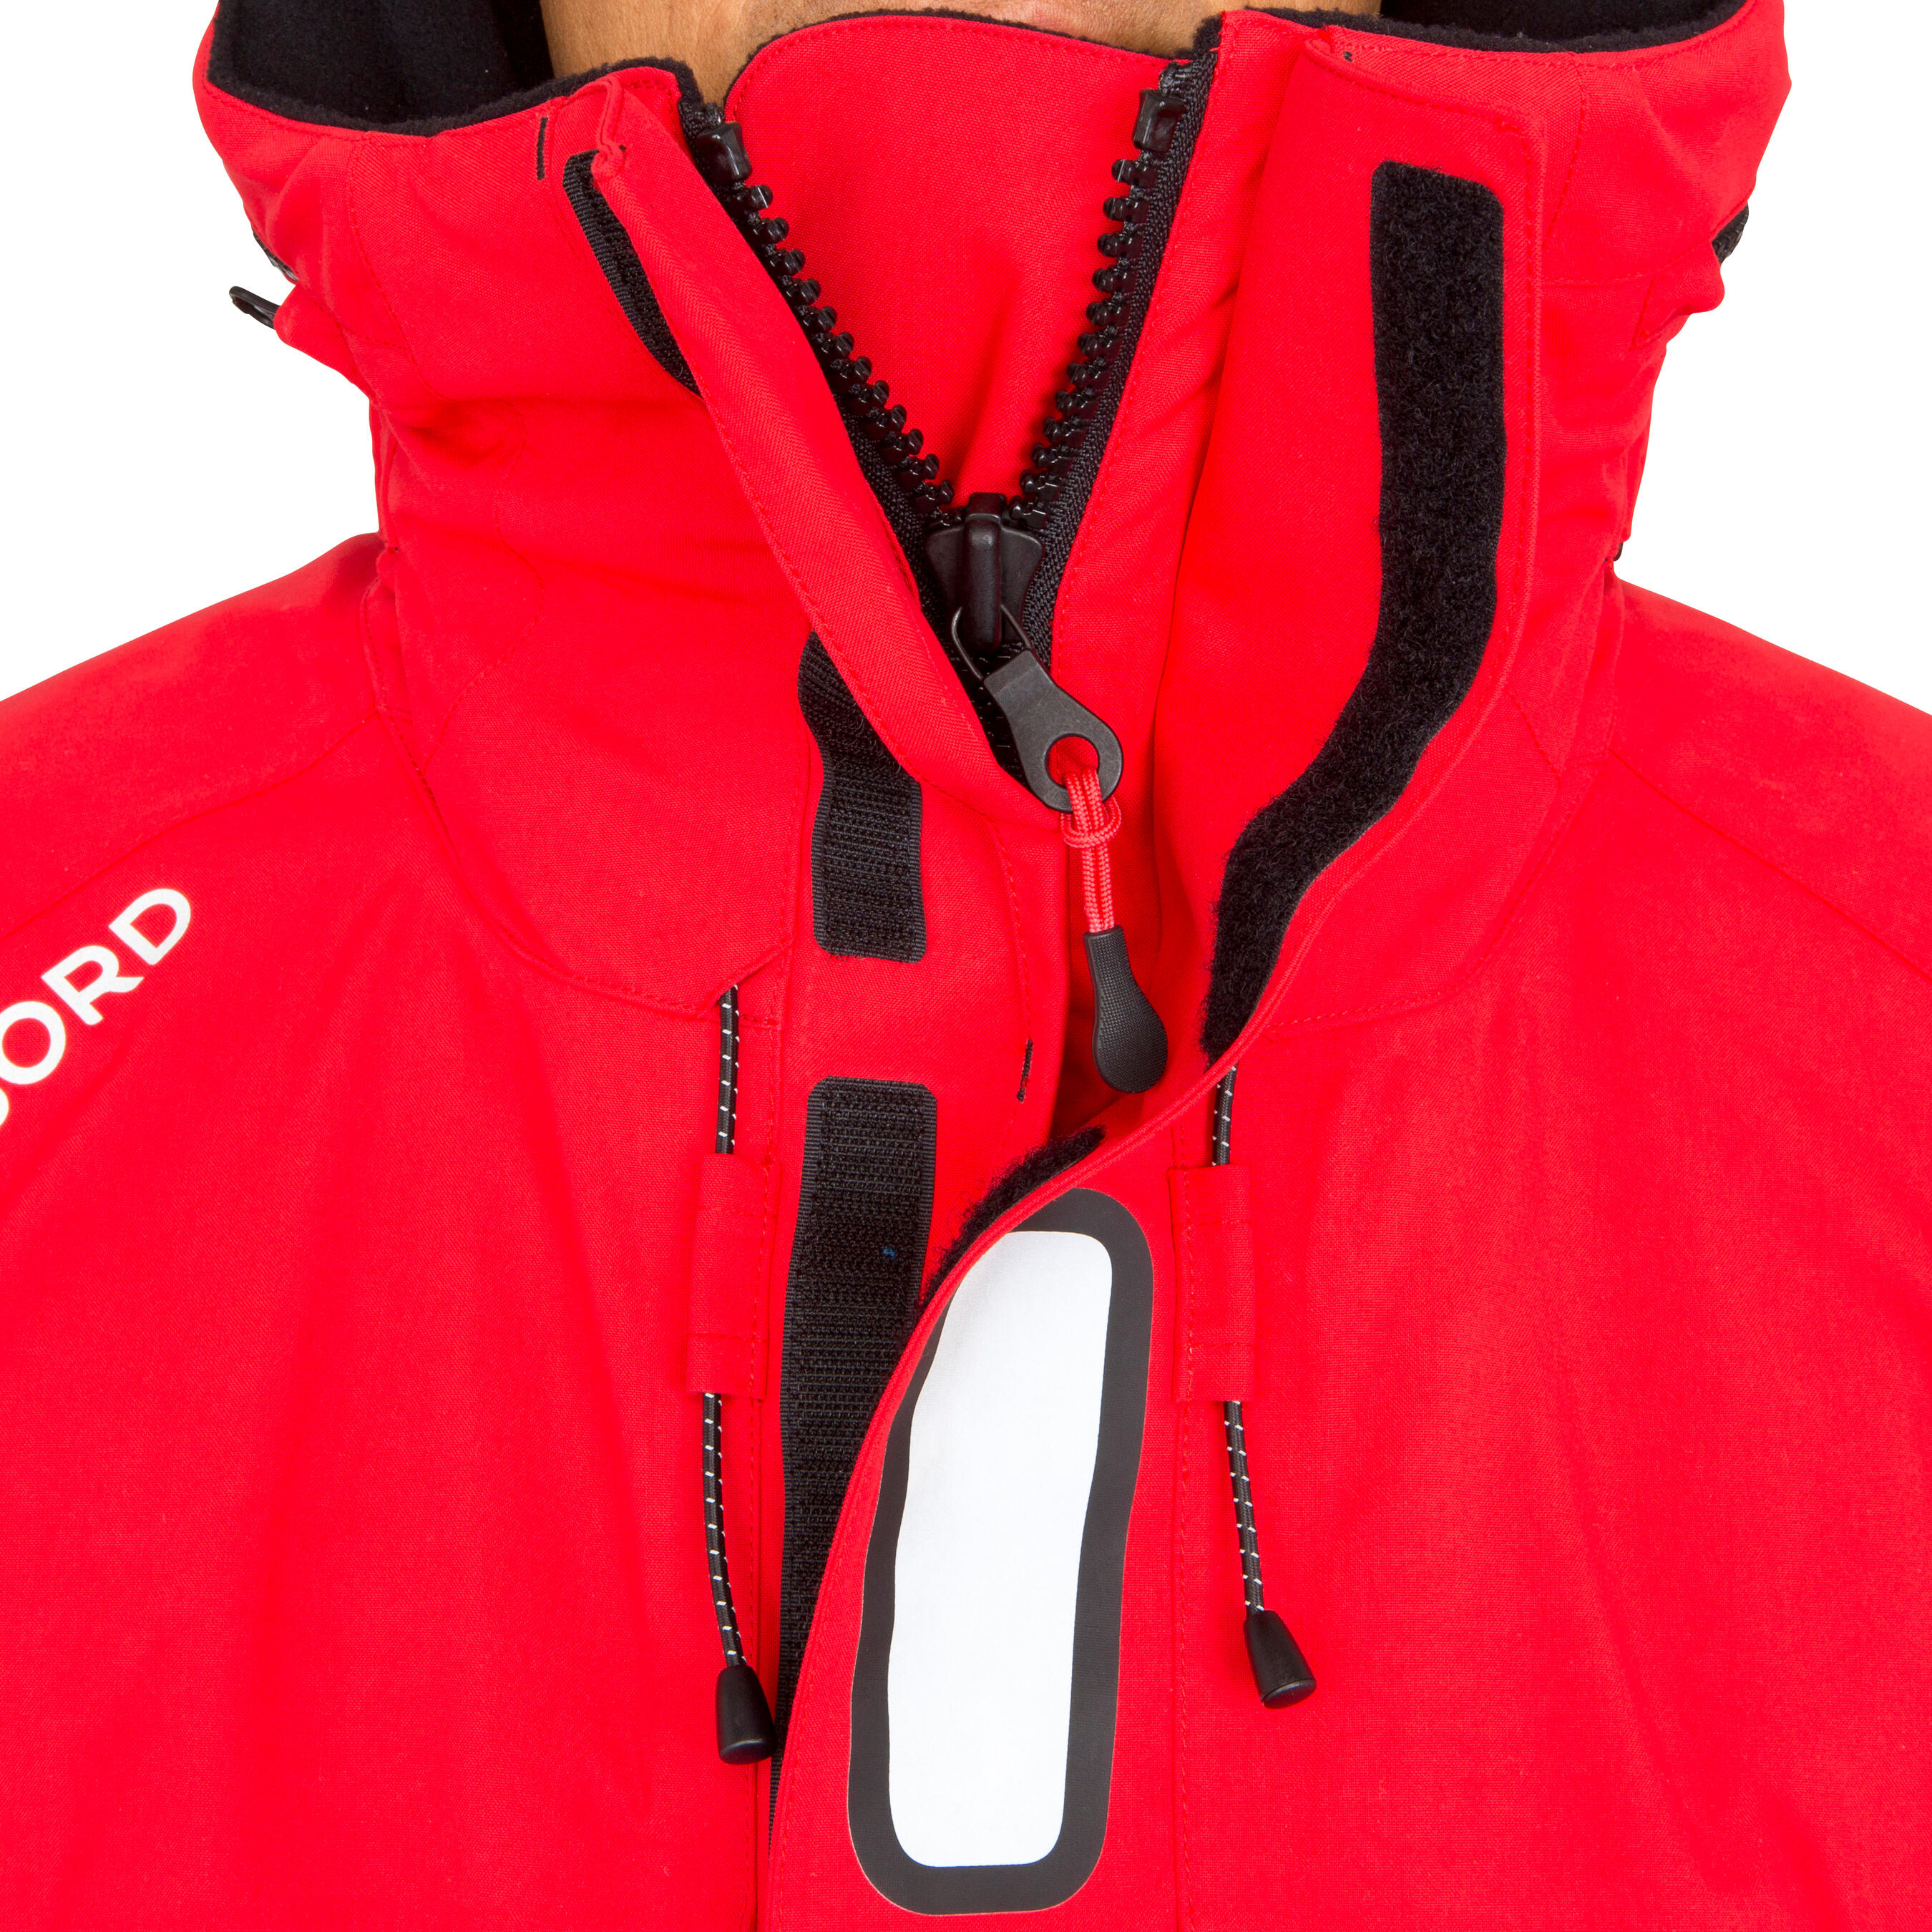 Ozean 900 Men's Waterproof and Breathable Sailing Jacket - Red 12/44